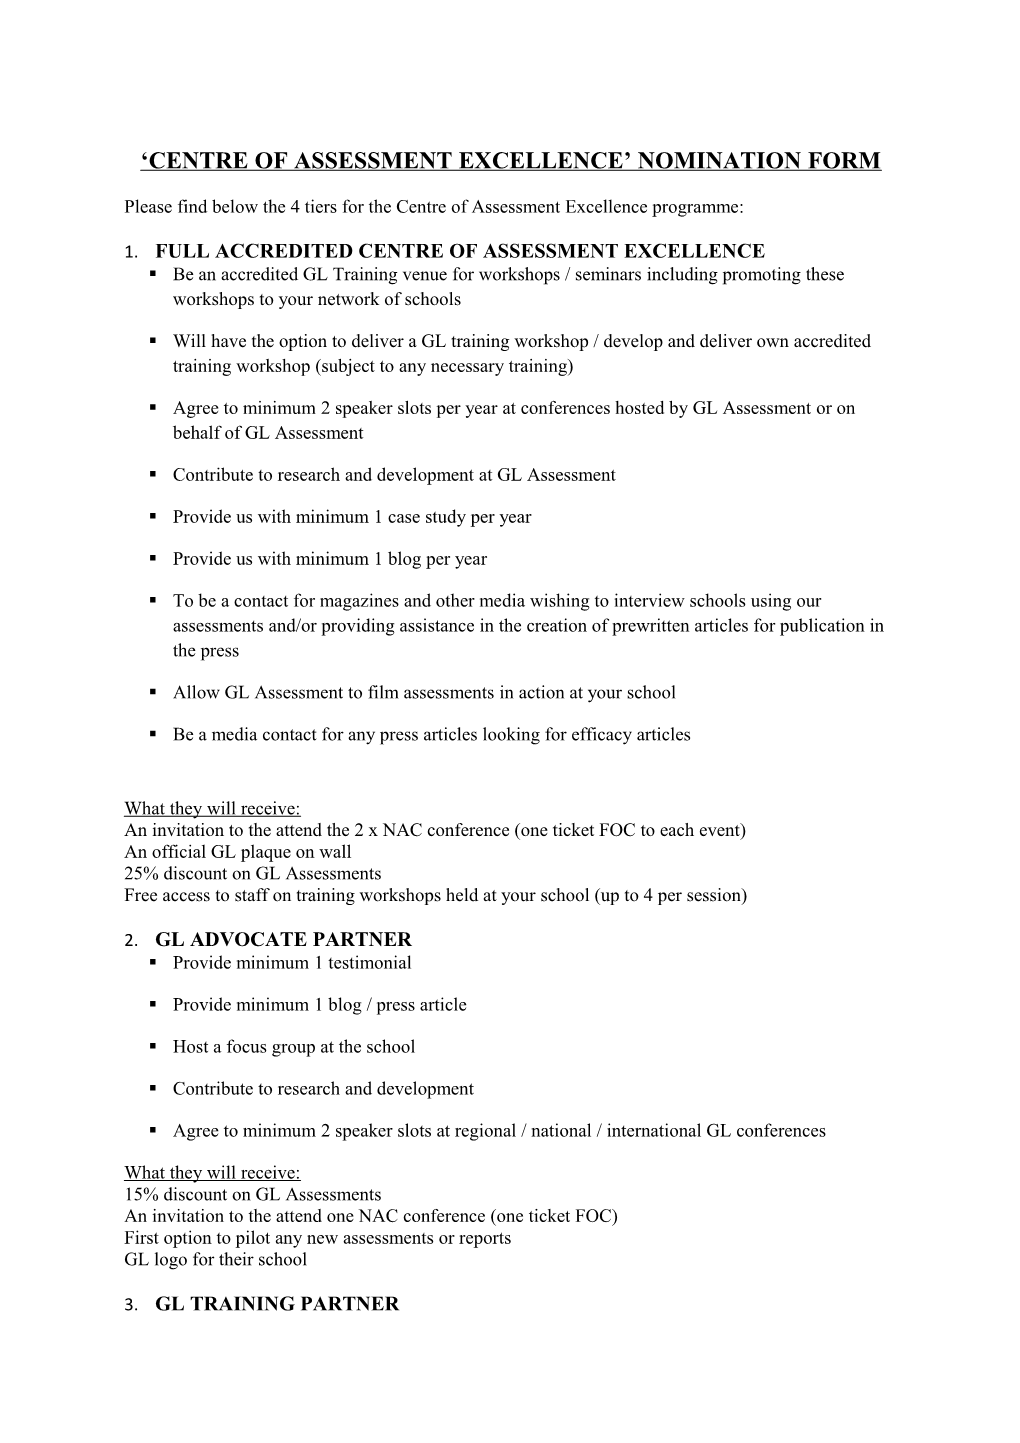 Centre of Assessment Excellence Nomination Form